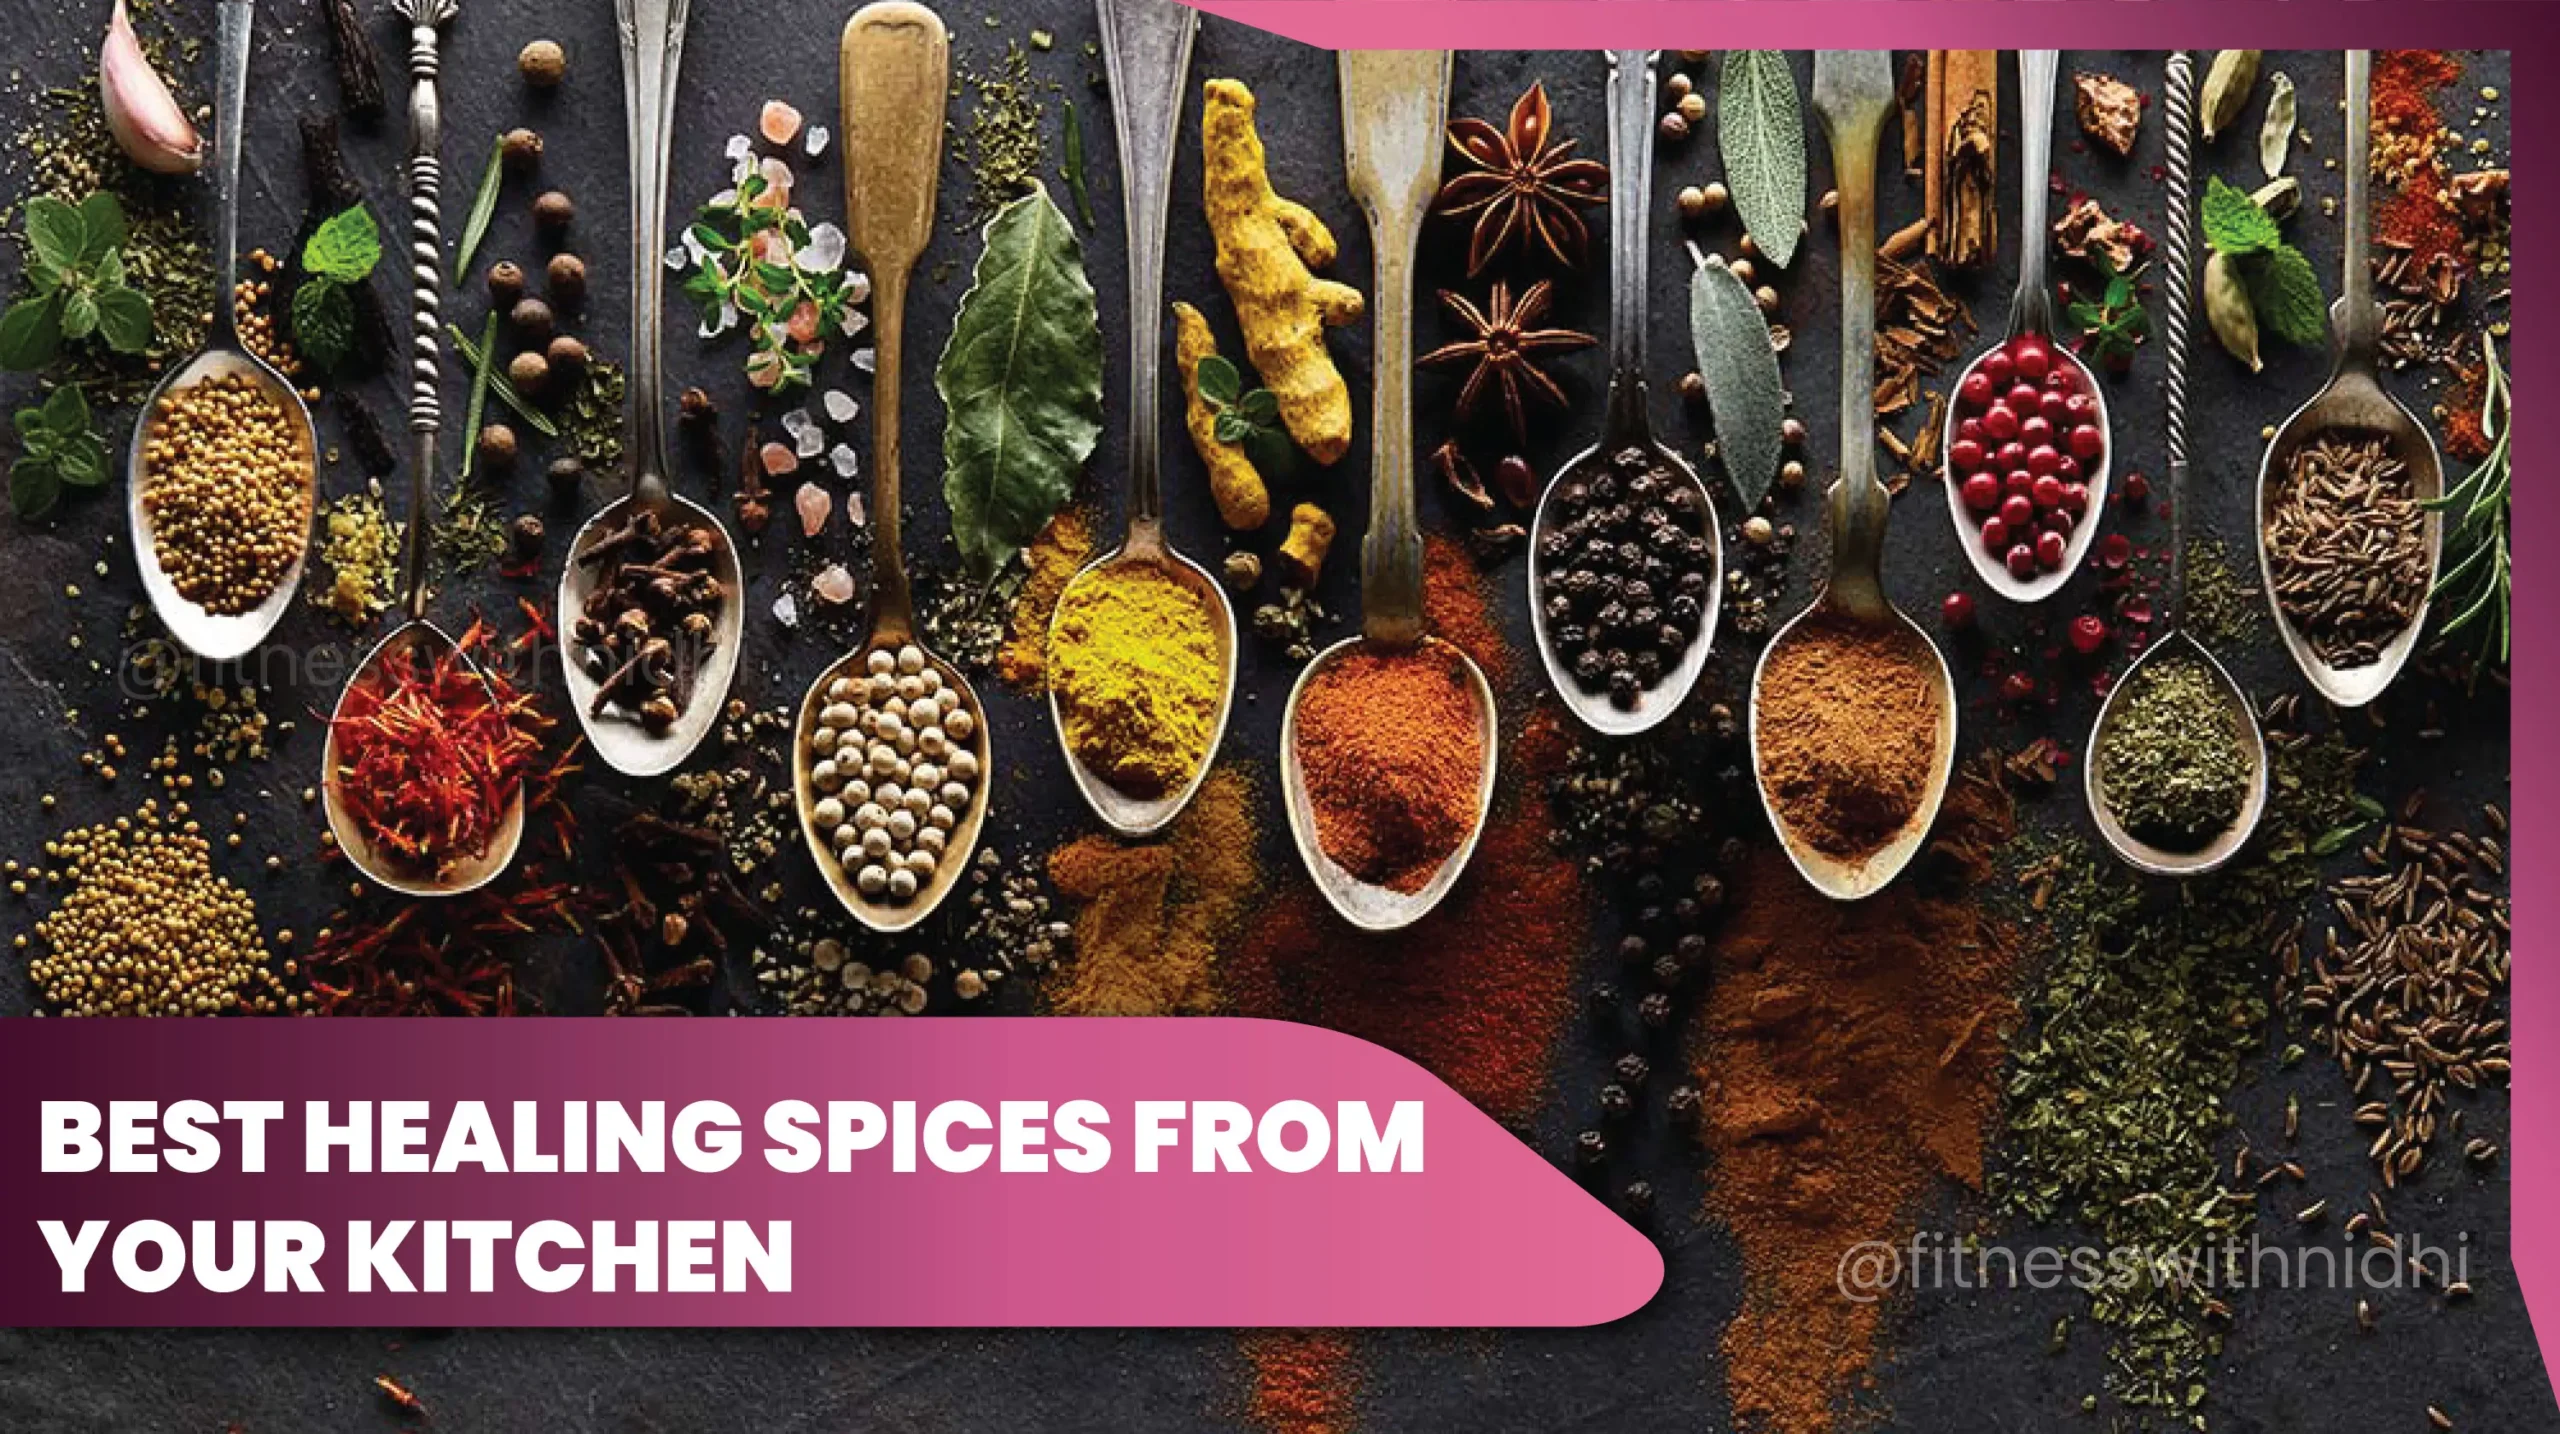 11best healing spices from your kitchen